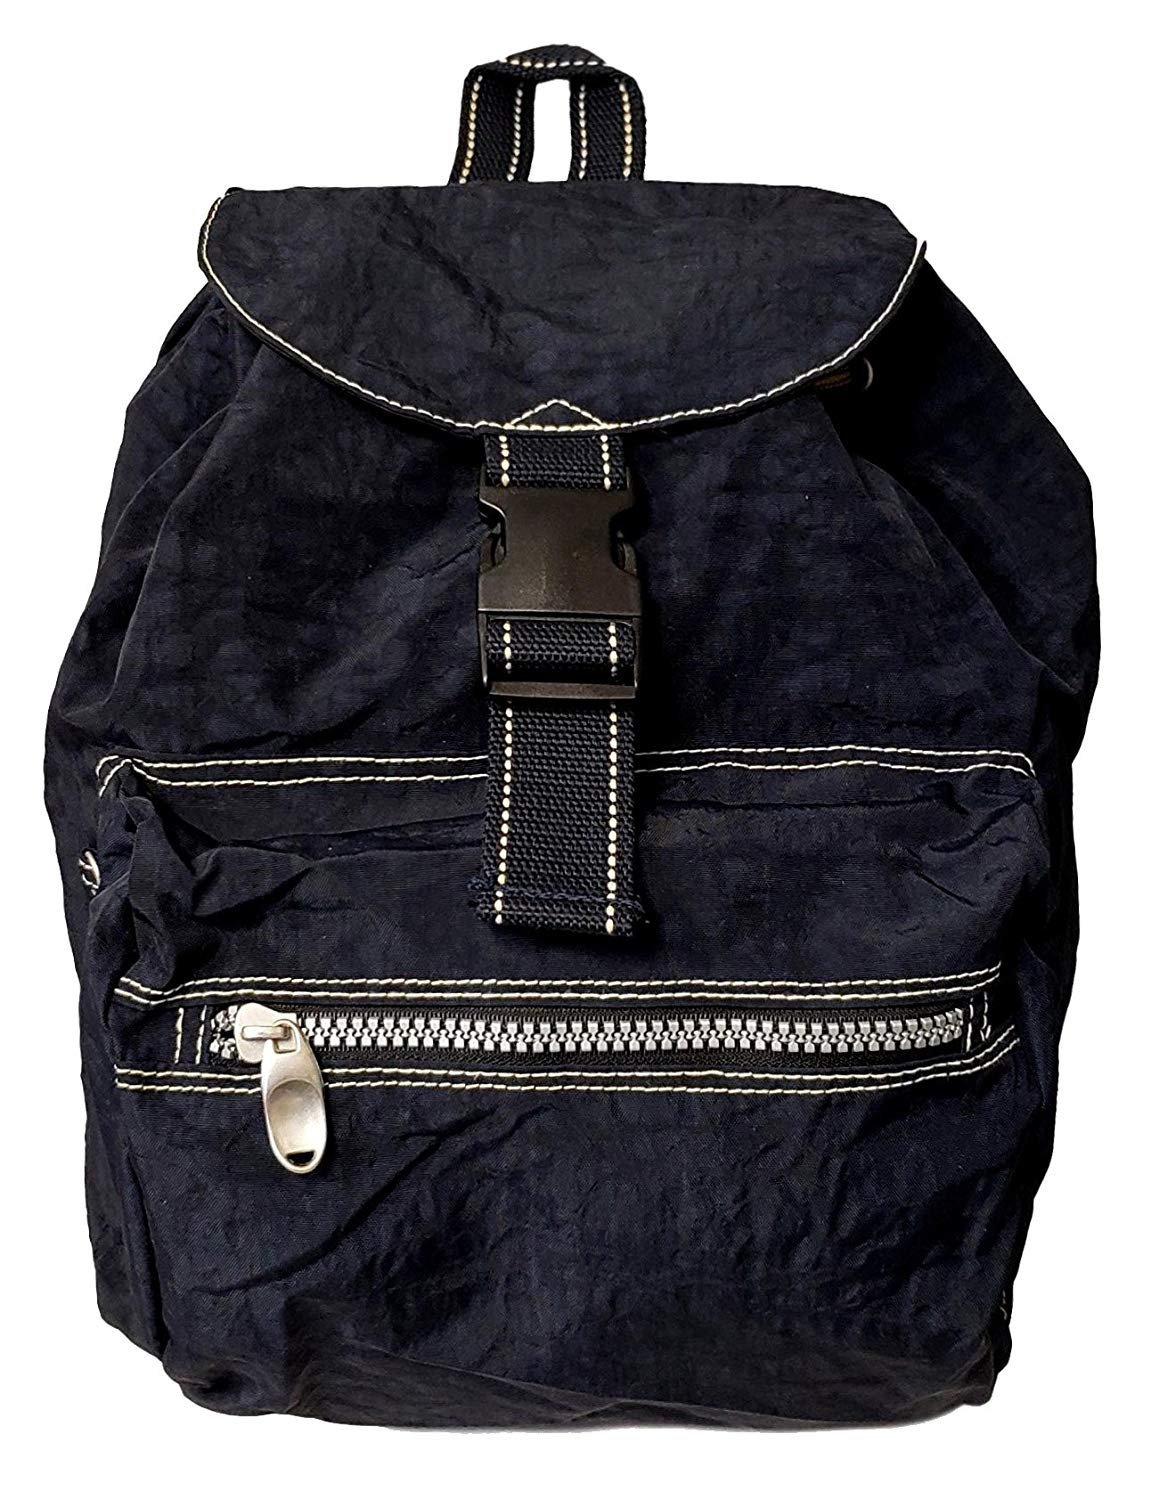 Lightweight Drawstring Flap Over Campus Backpack Blue - image 1 of 4